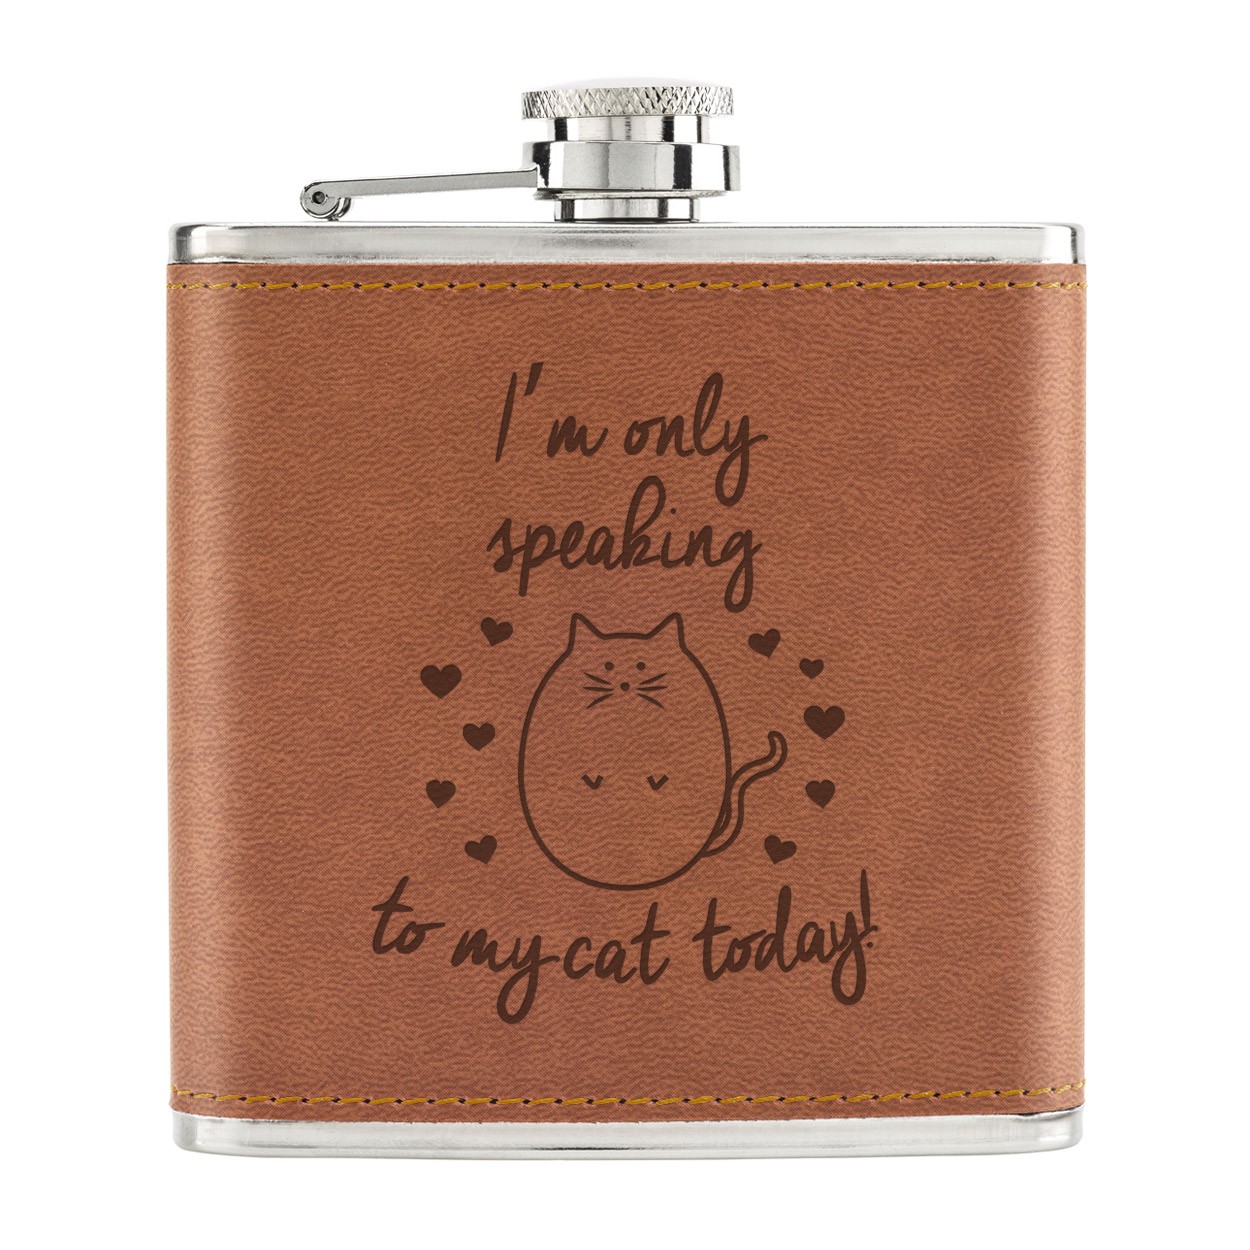 I'm Only Speaking To My Cat Today 6oz PU Leather Hip Flask Tan